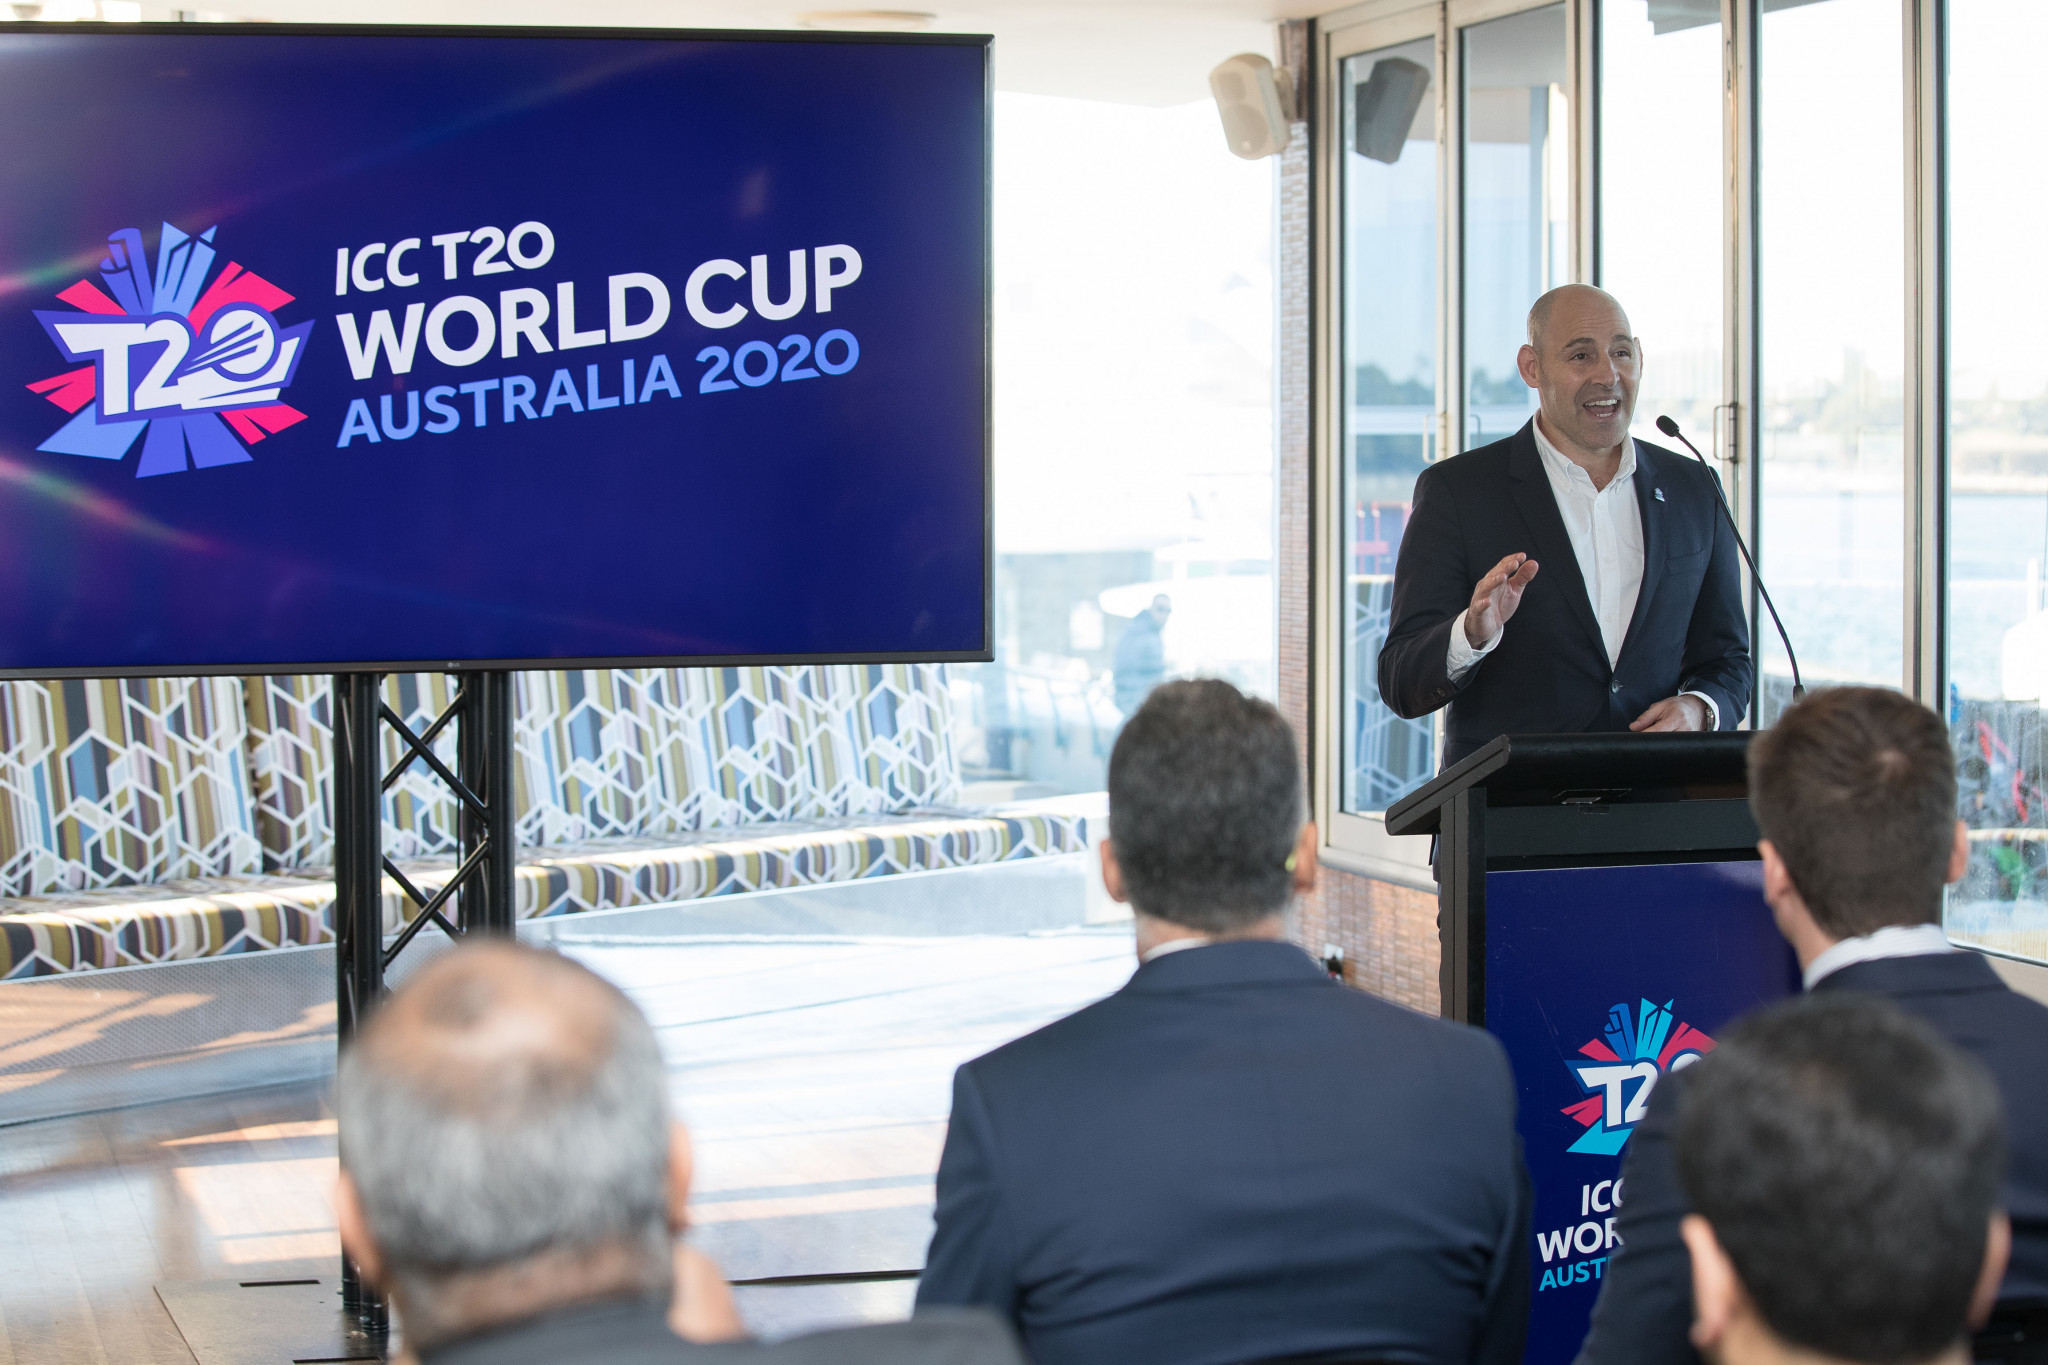 Techfront Australia to deliver sports tech at ICC T20 World Cup